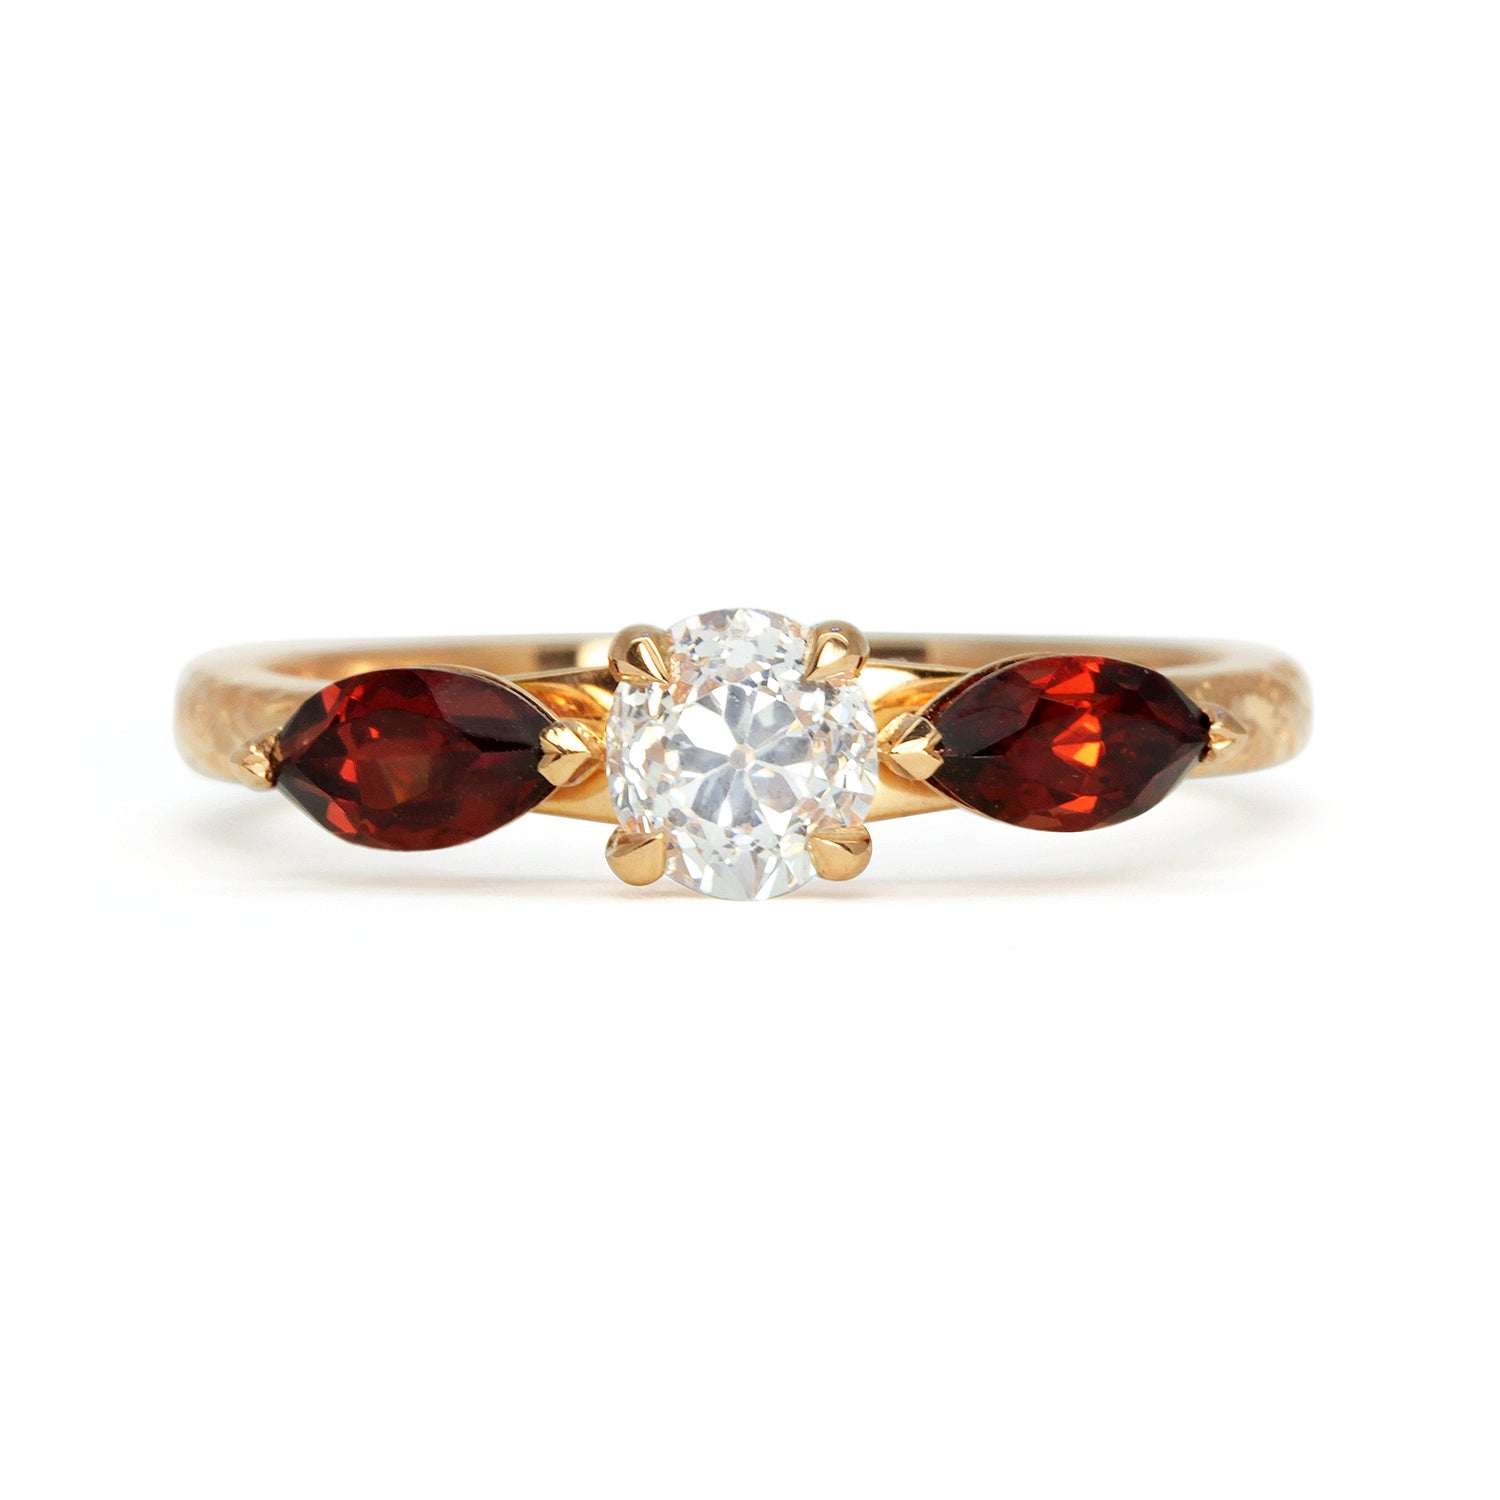 Bespoke Craig Recycled Old Cut Diamond and Garnet Trilogy Engagement Ring